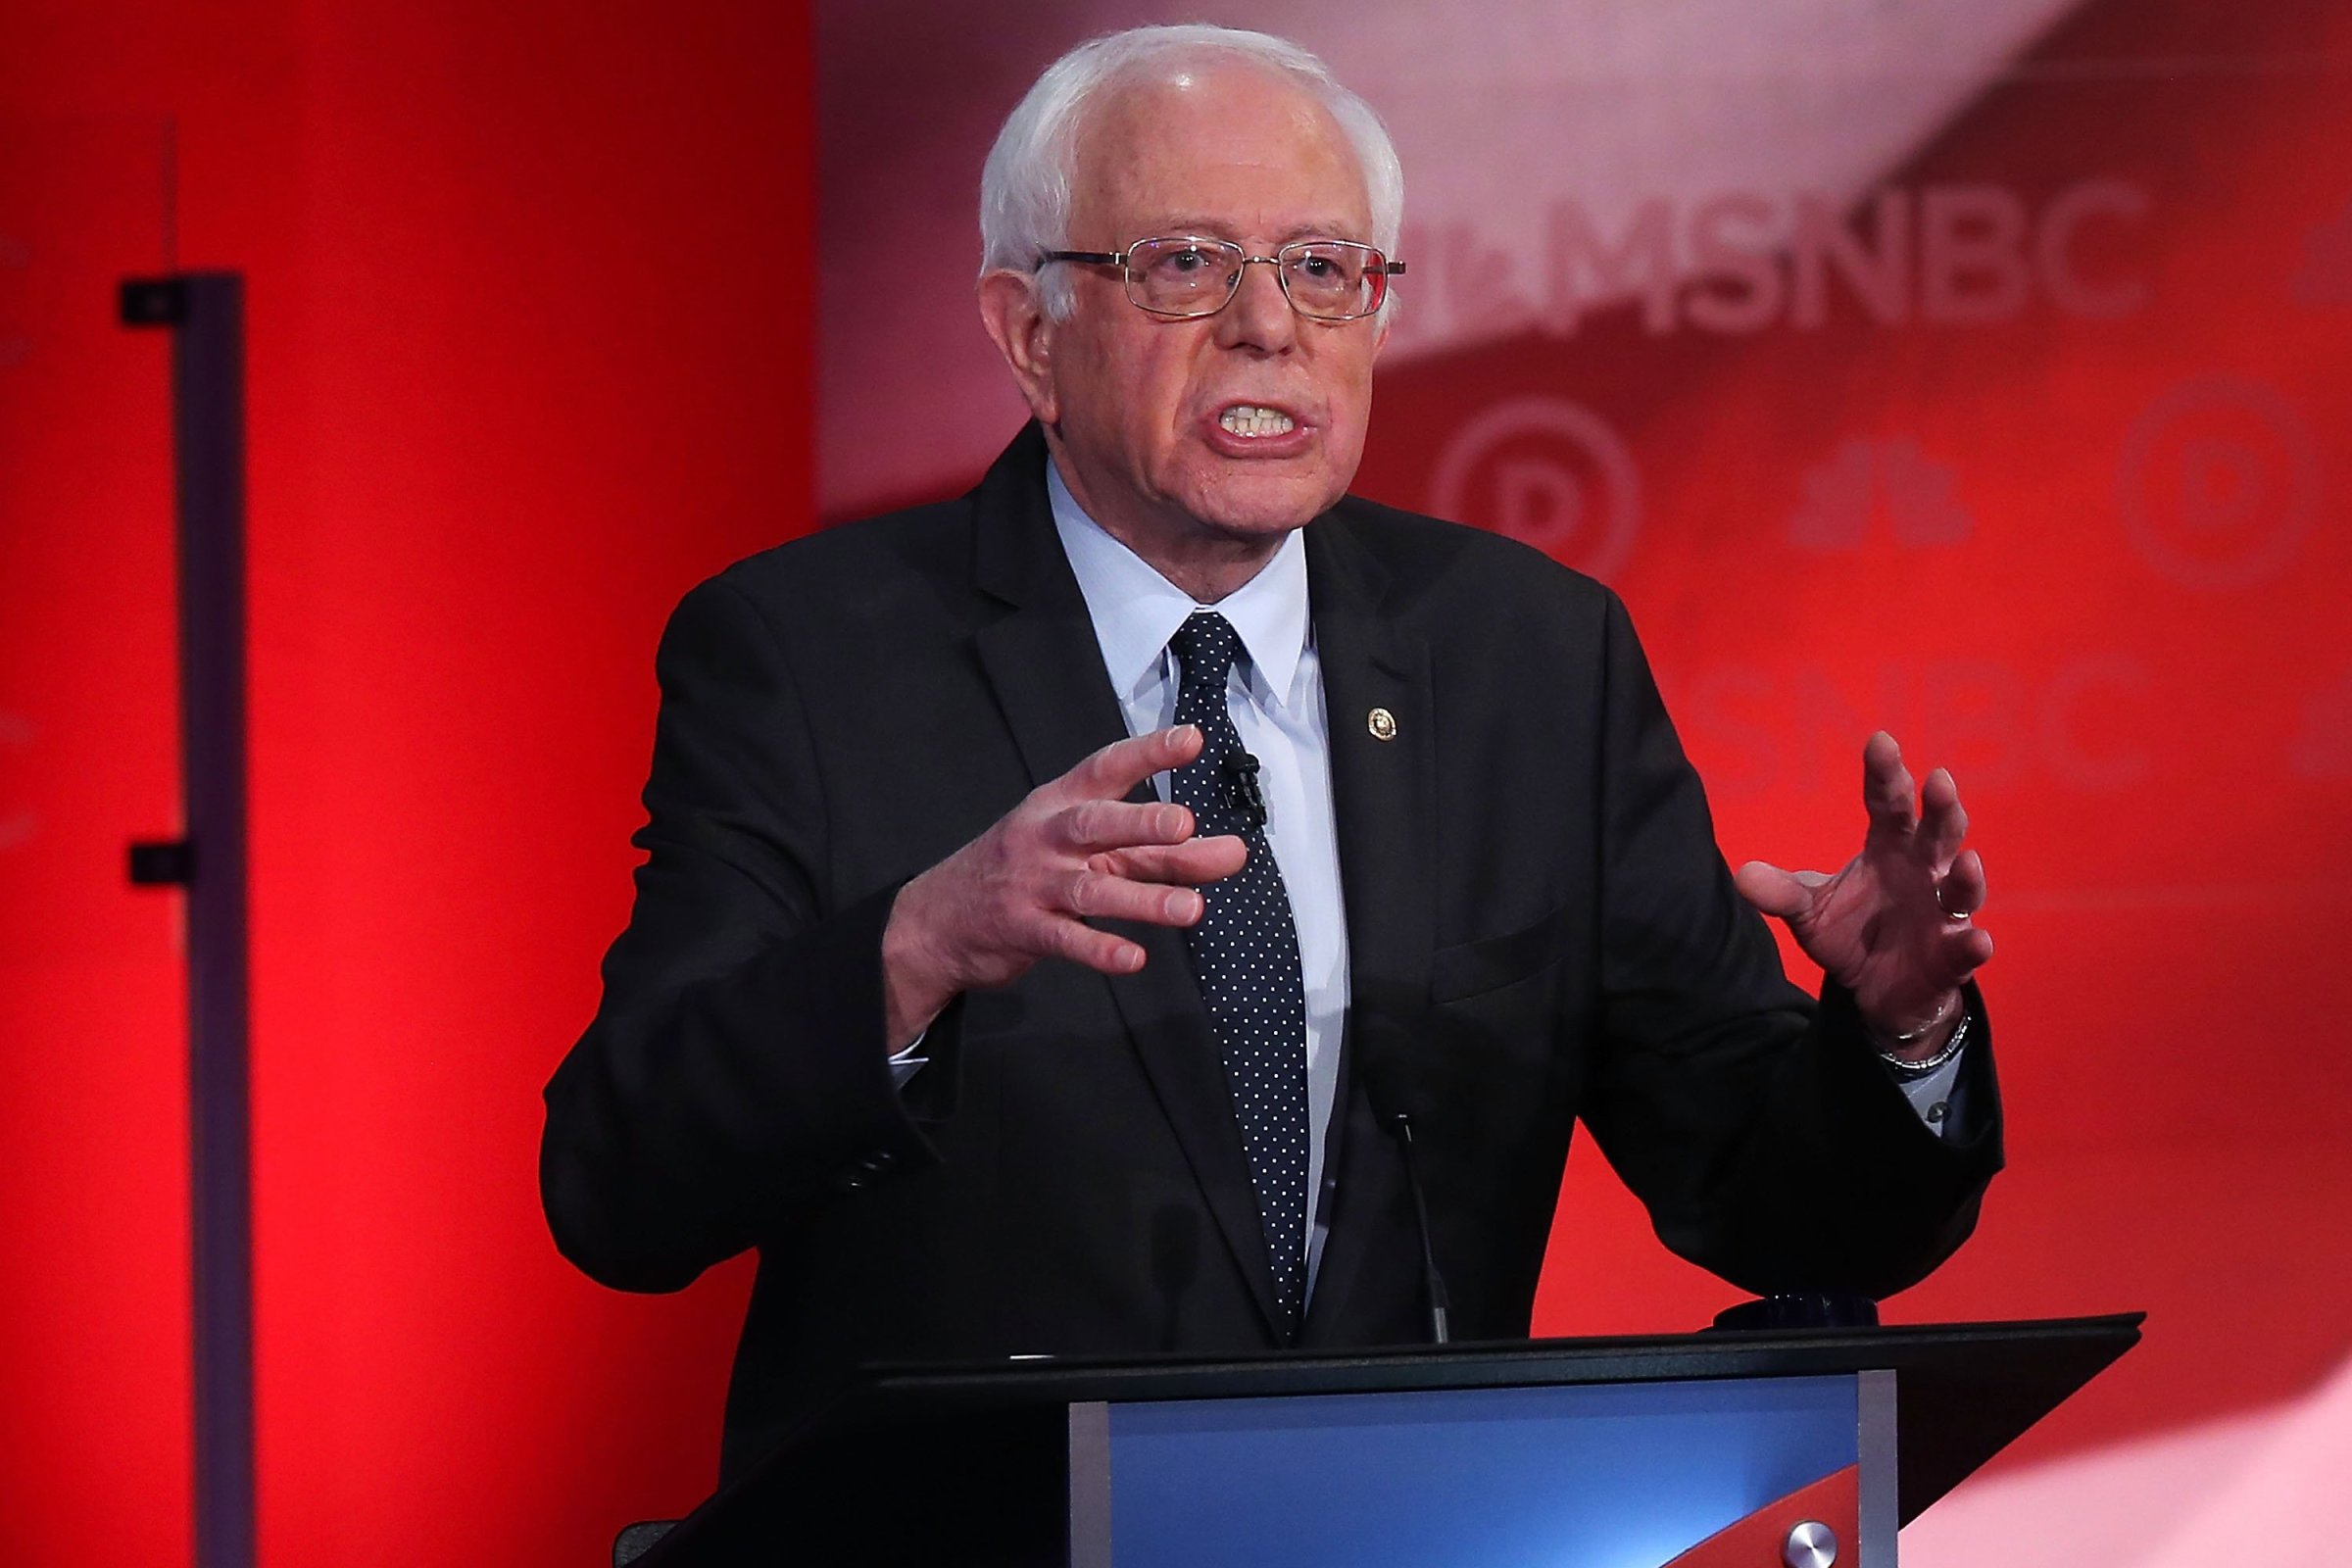 Democratic presidential candidate U.S. Sen. Bernie Sanders (I-VT) speaks during a Democratic debate with former Secretary of State Hillary Clinton at the University of New Hampshire on Feb. 4, 2016 in Durham, N.H.